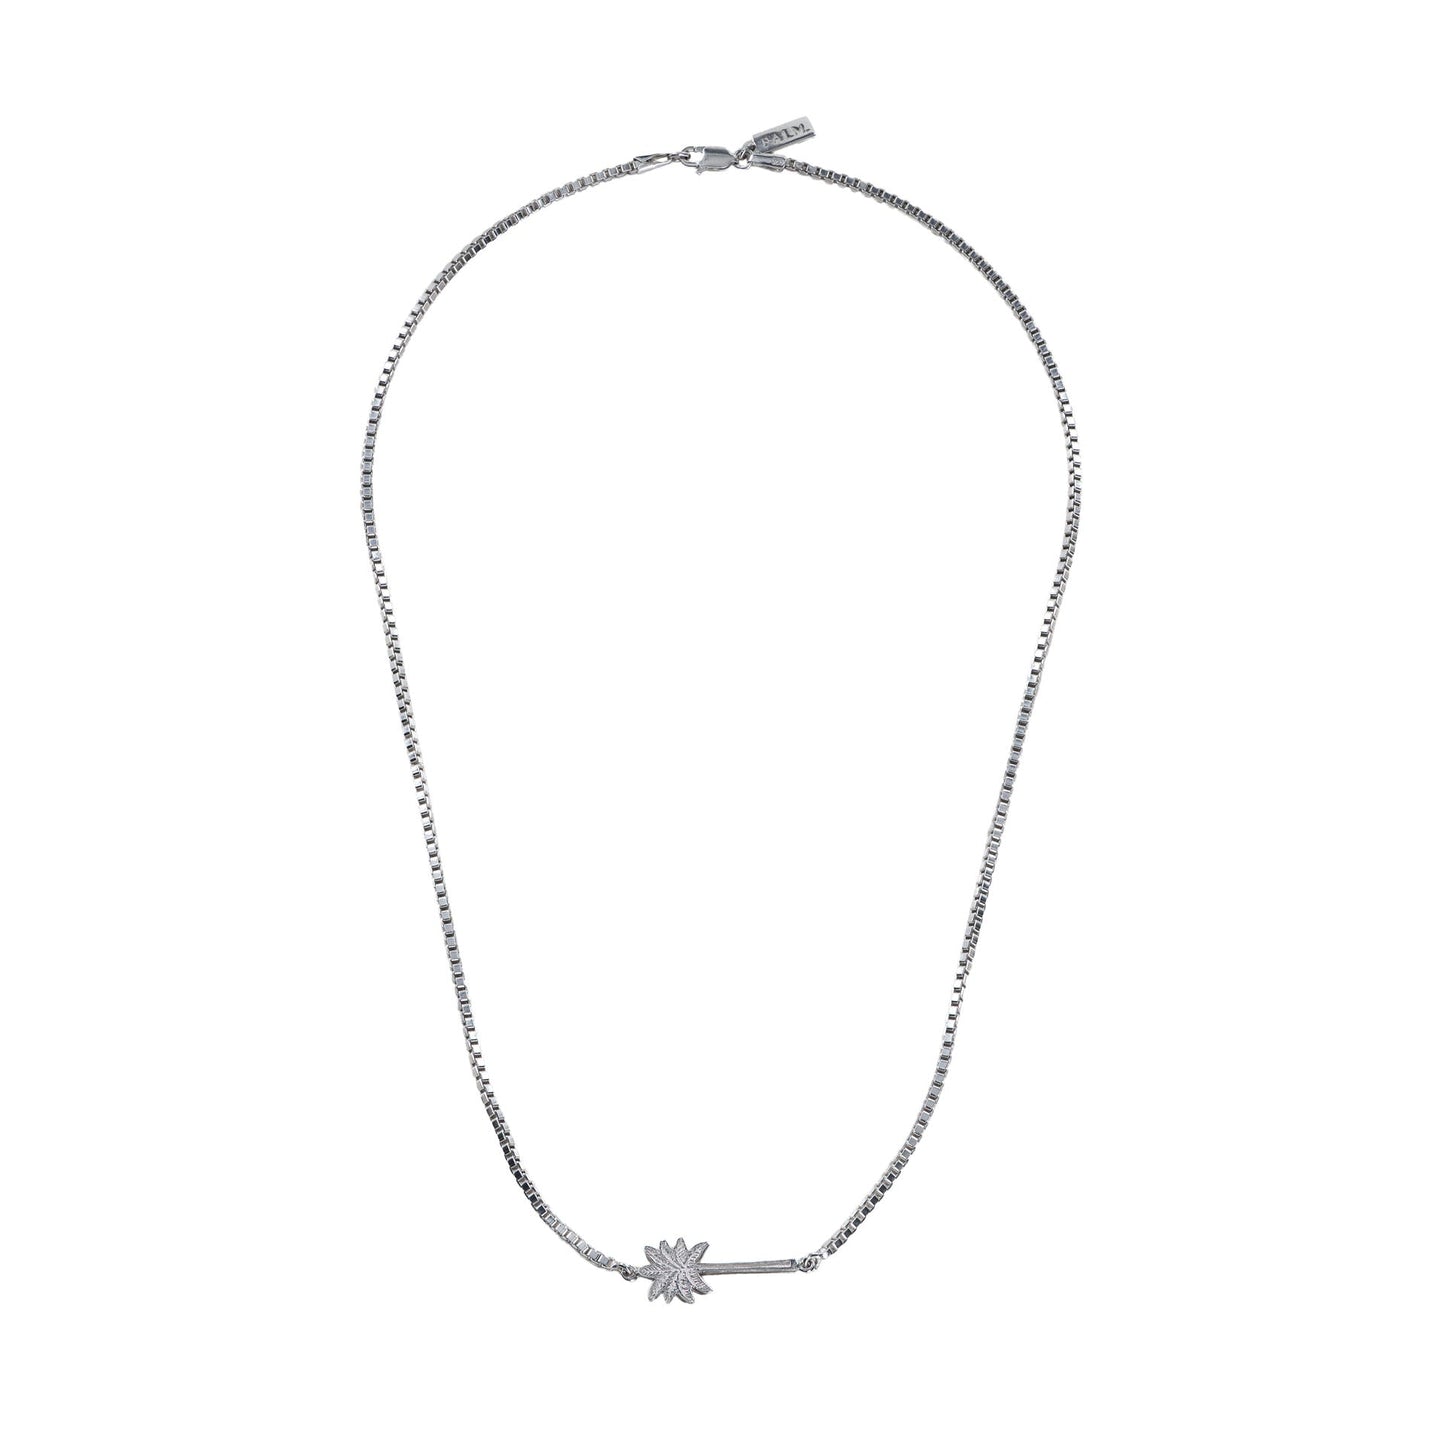 PALM CHAIN. - 925 Silver Palm Tree Chain - PALM. | Handcrafted Jewelry-